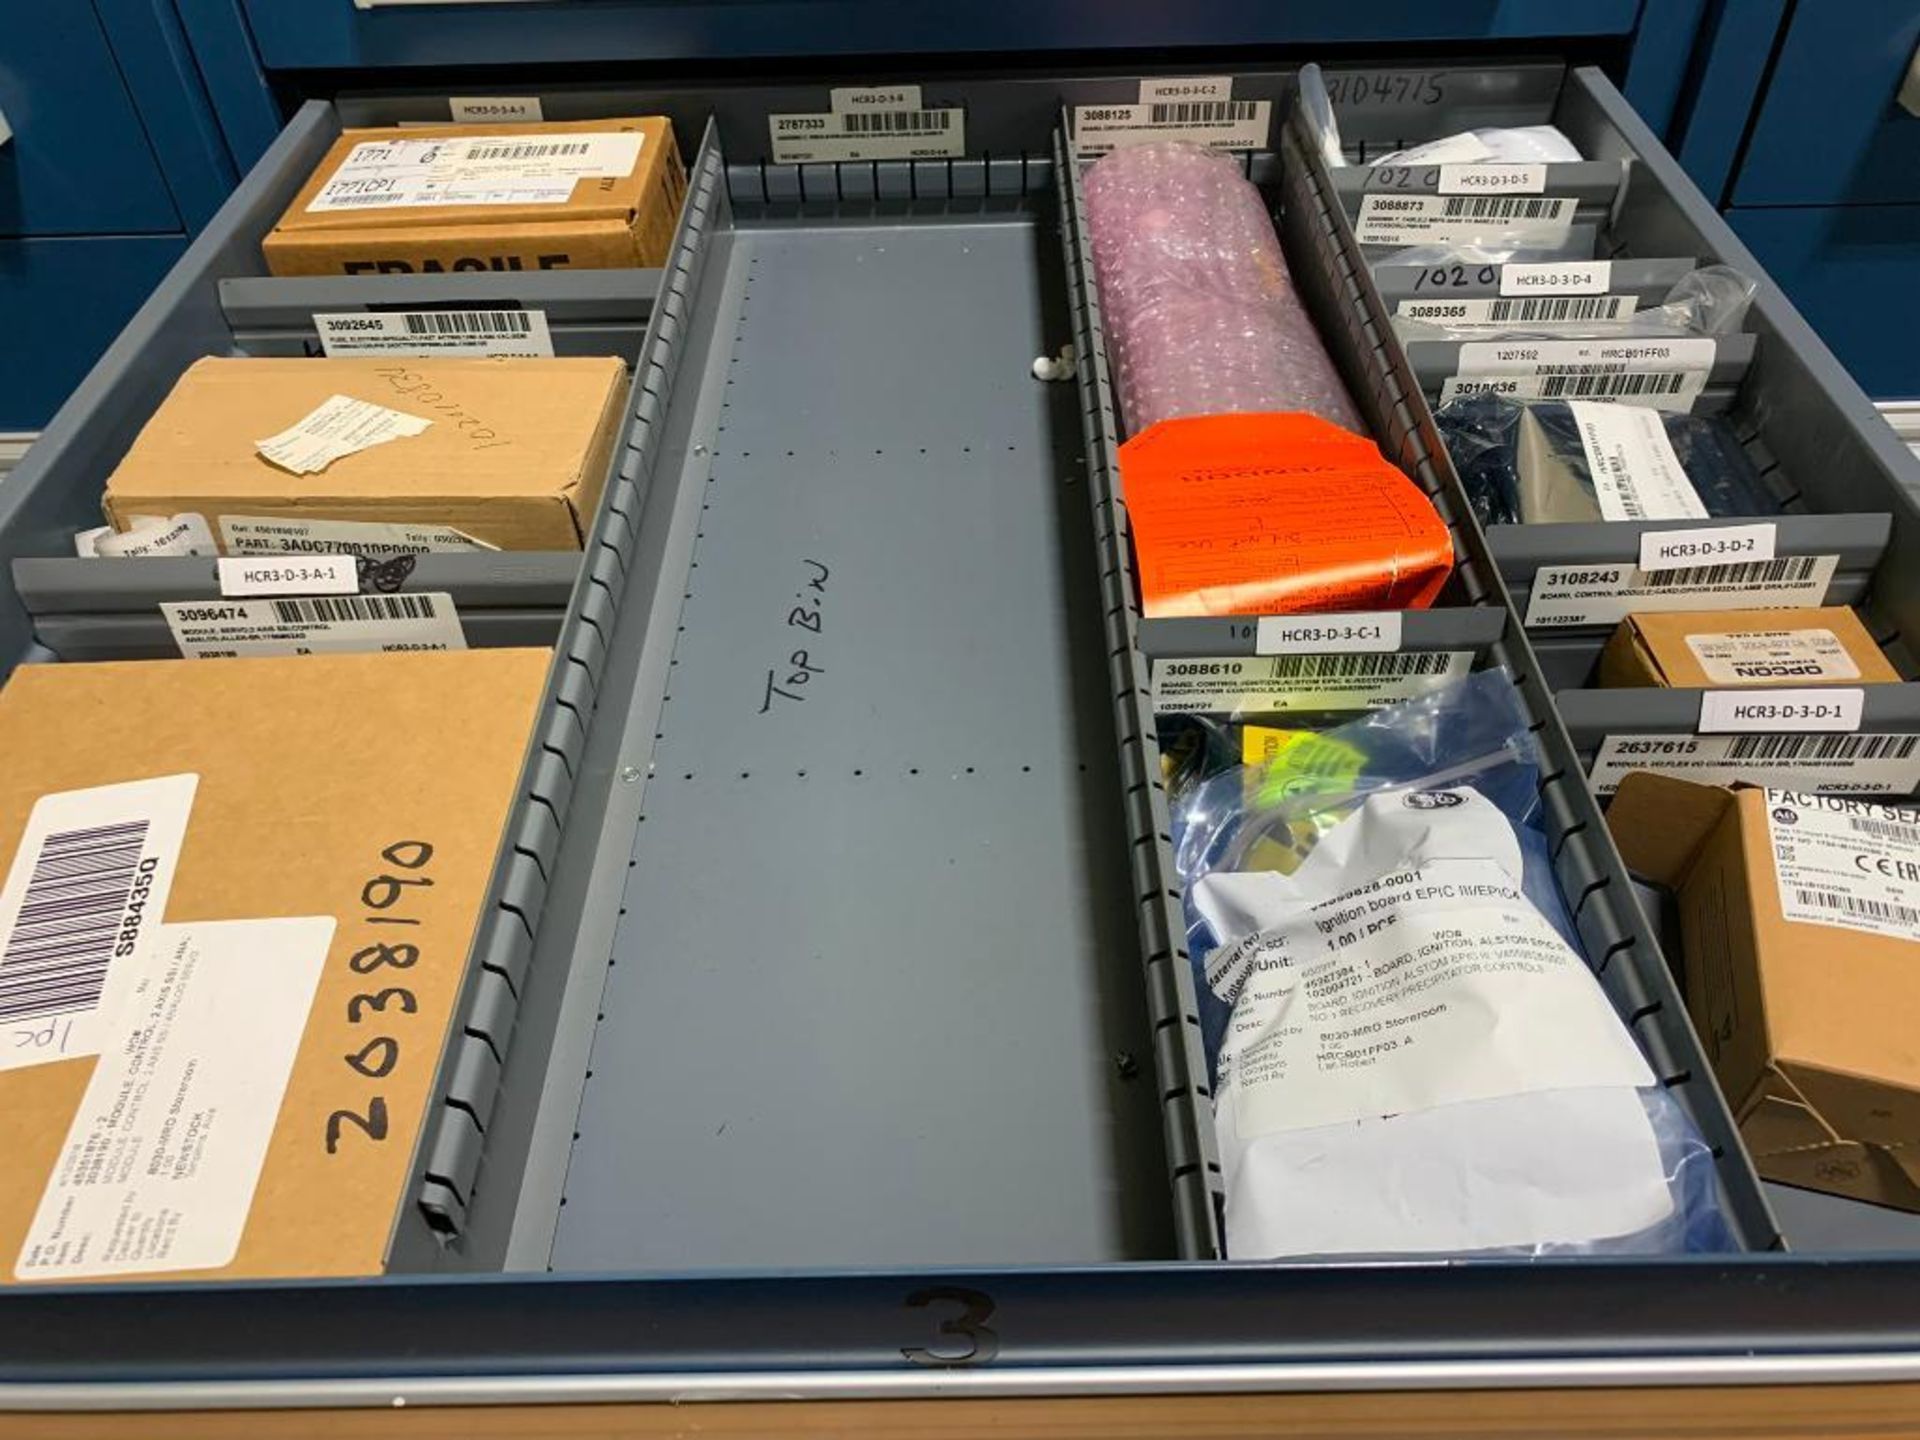 Stanley Vidmar 10-Drawer Cabinet w/ Electrical Support Equipment; Assorted Sensors, Assorted Modules - Image 4 of 11